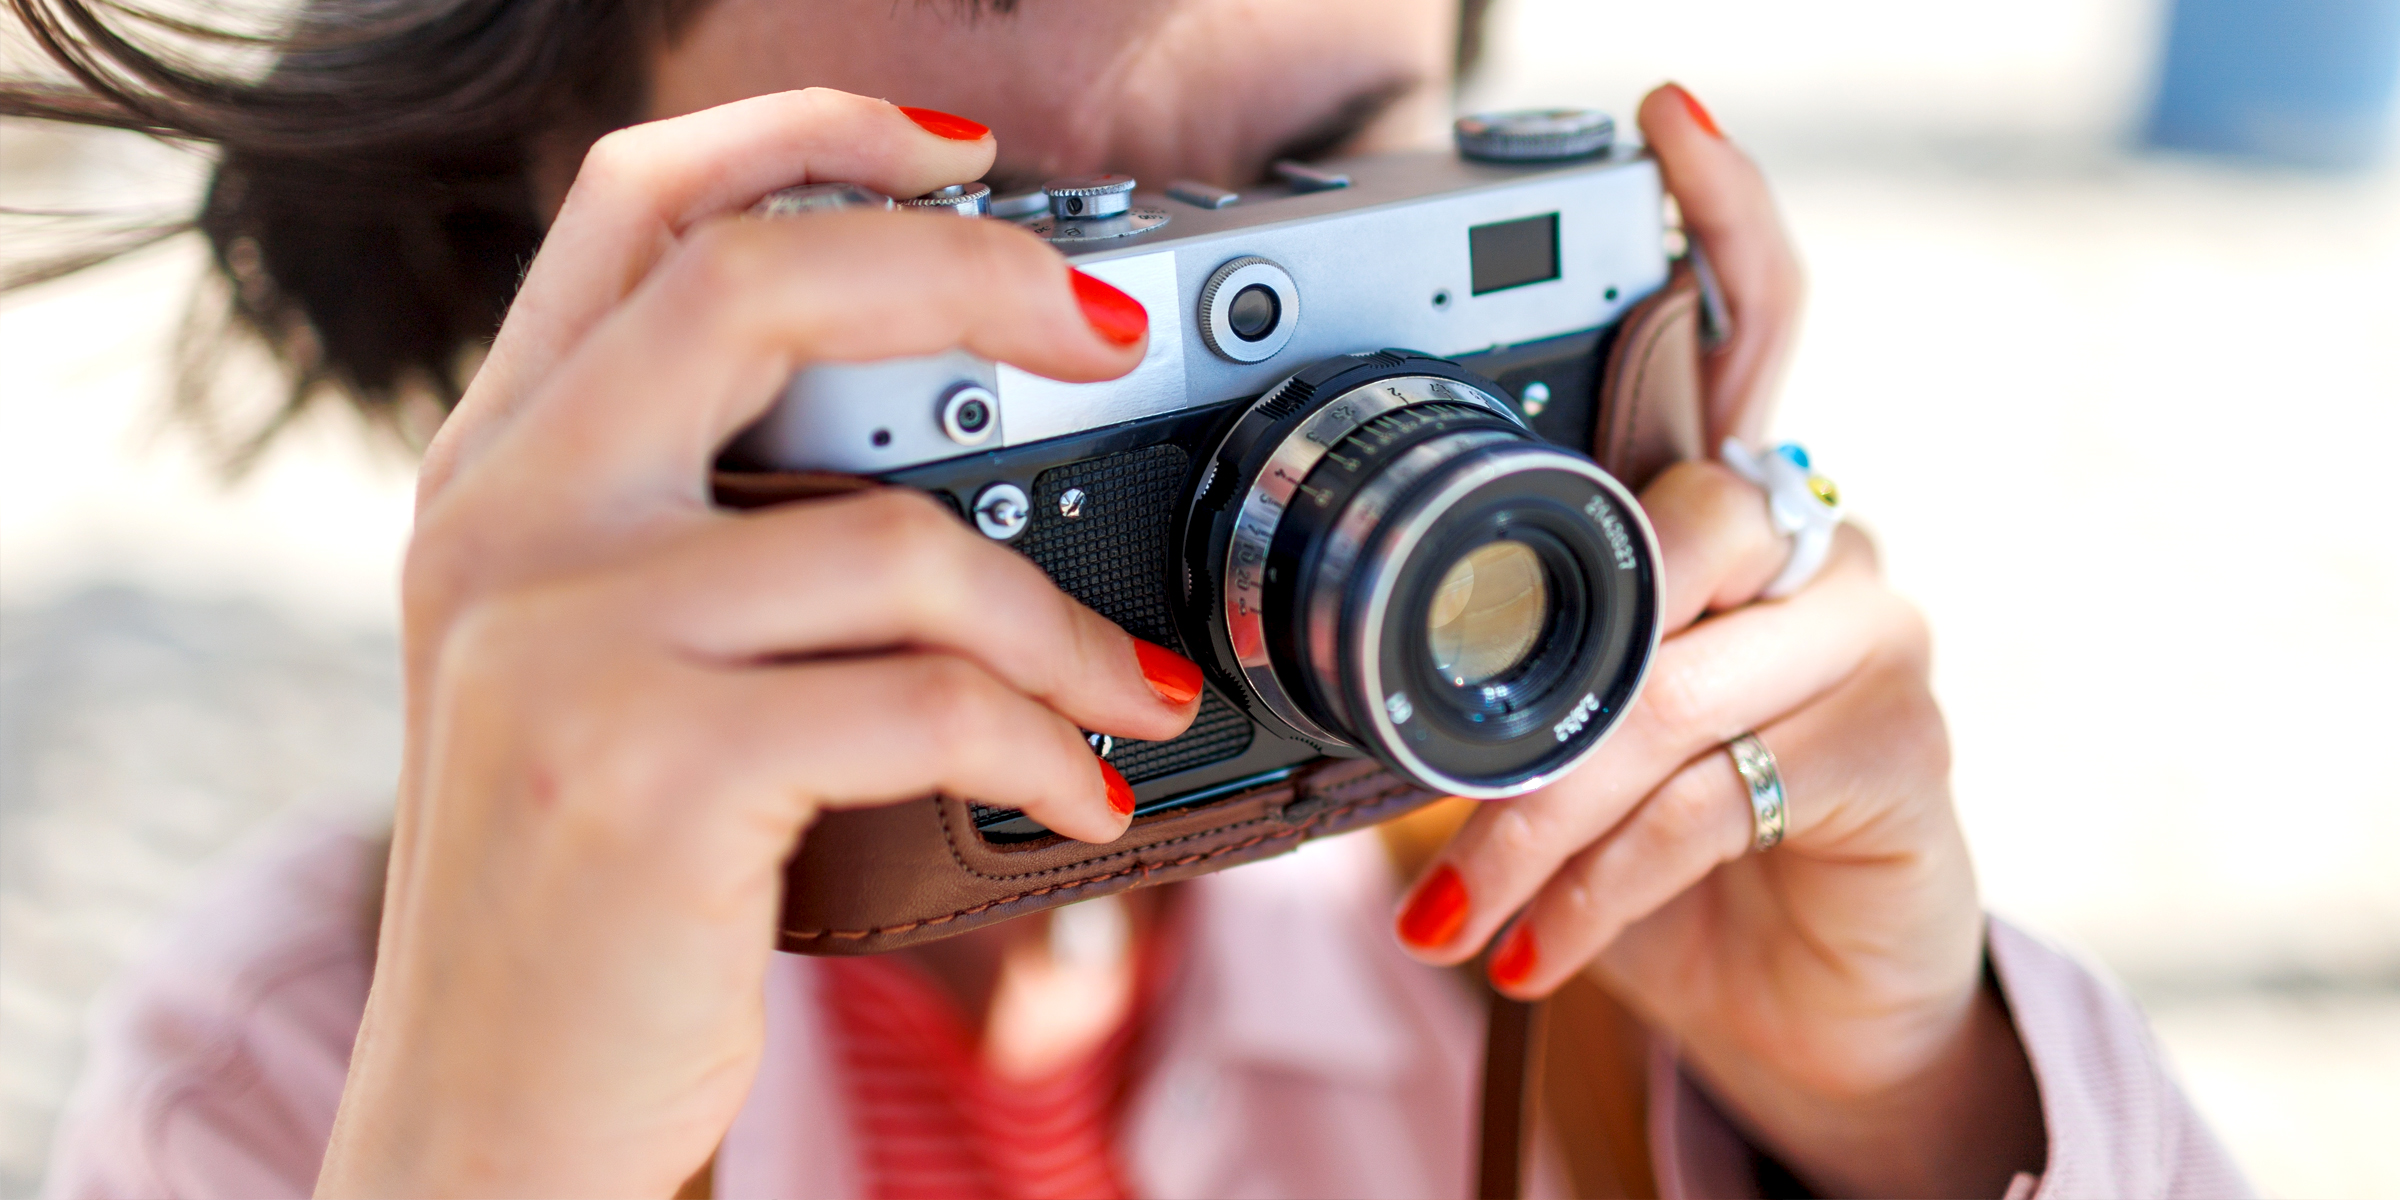 Woman taking a picture | Source: Shutterstock